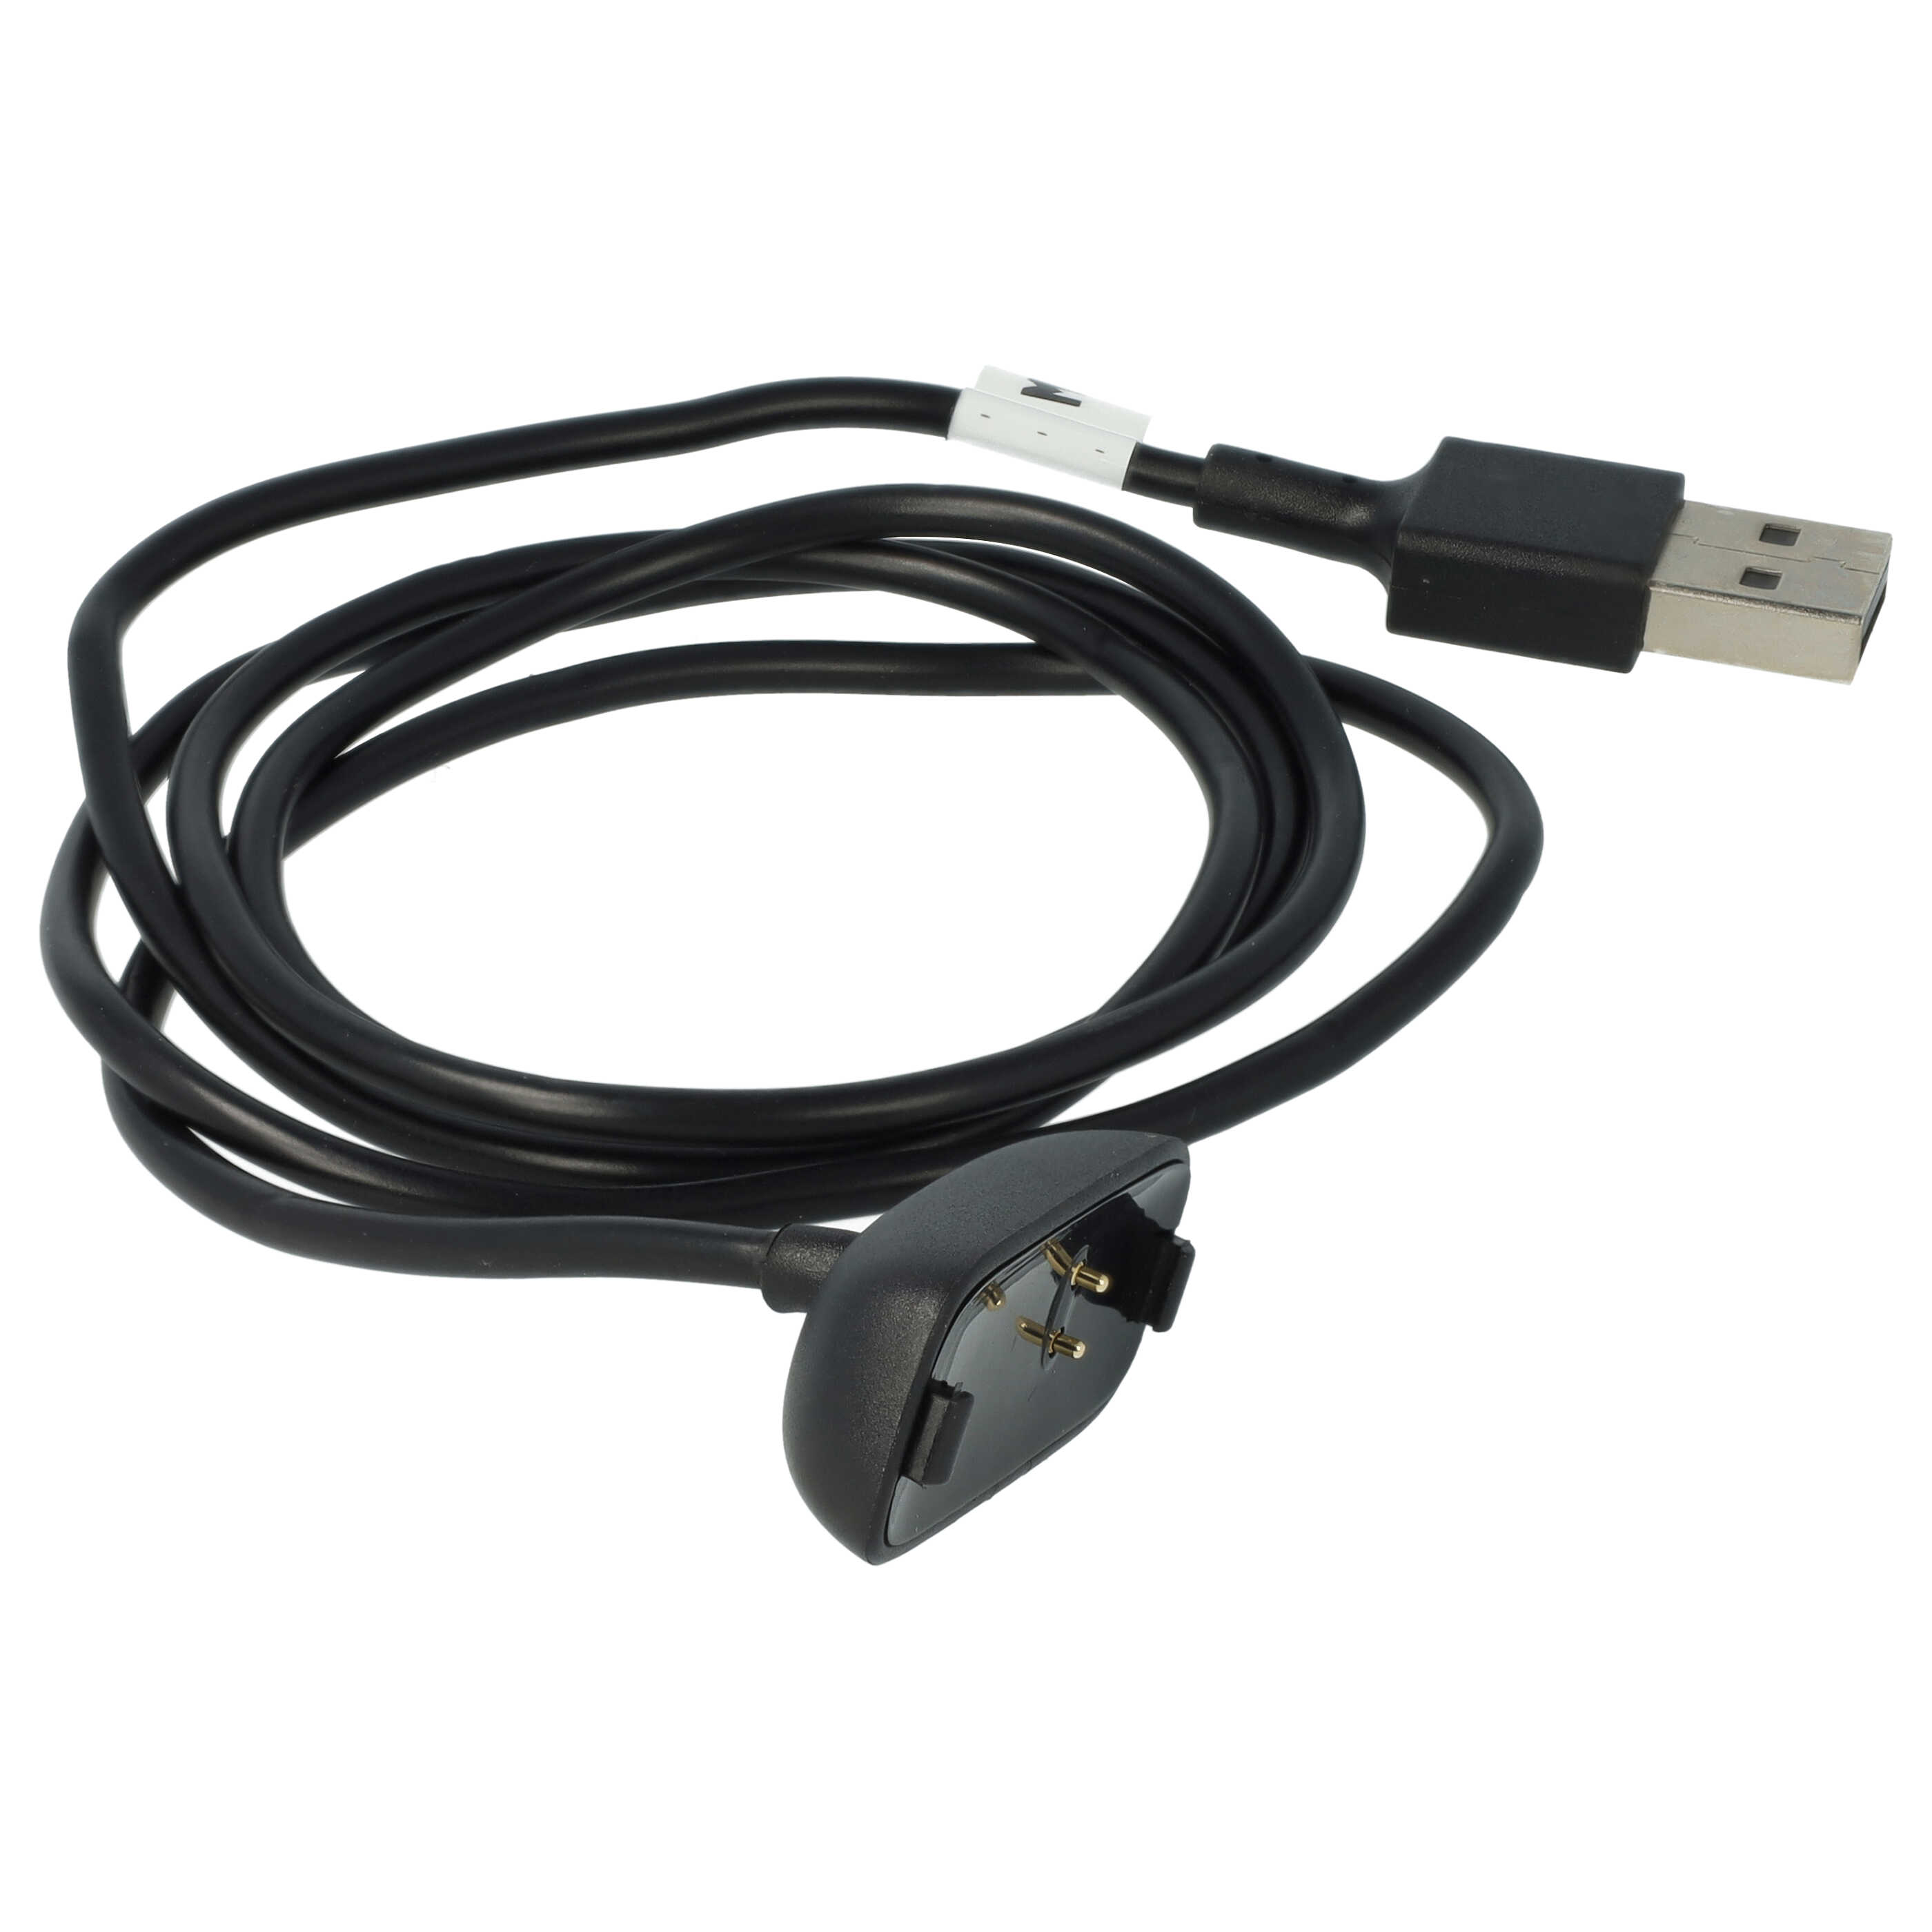 Charging Cable suitable for 3, 2 Fitbit Ace Fitness Tracker - USB A Cable, 100cm, black